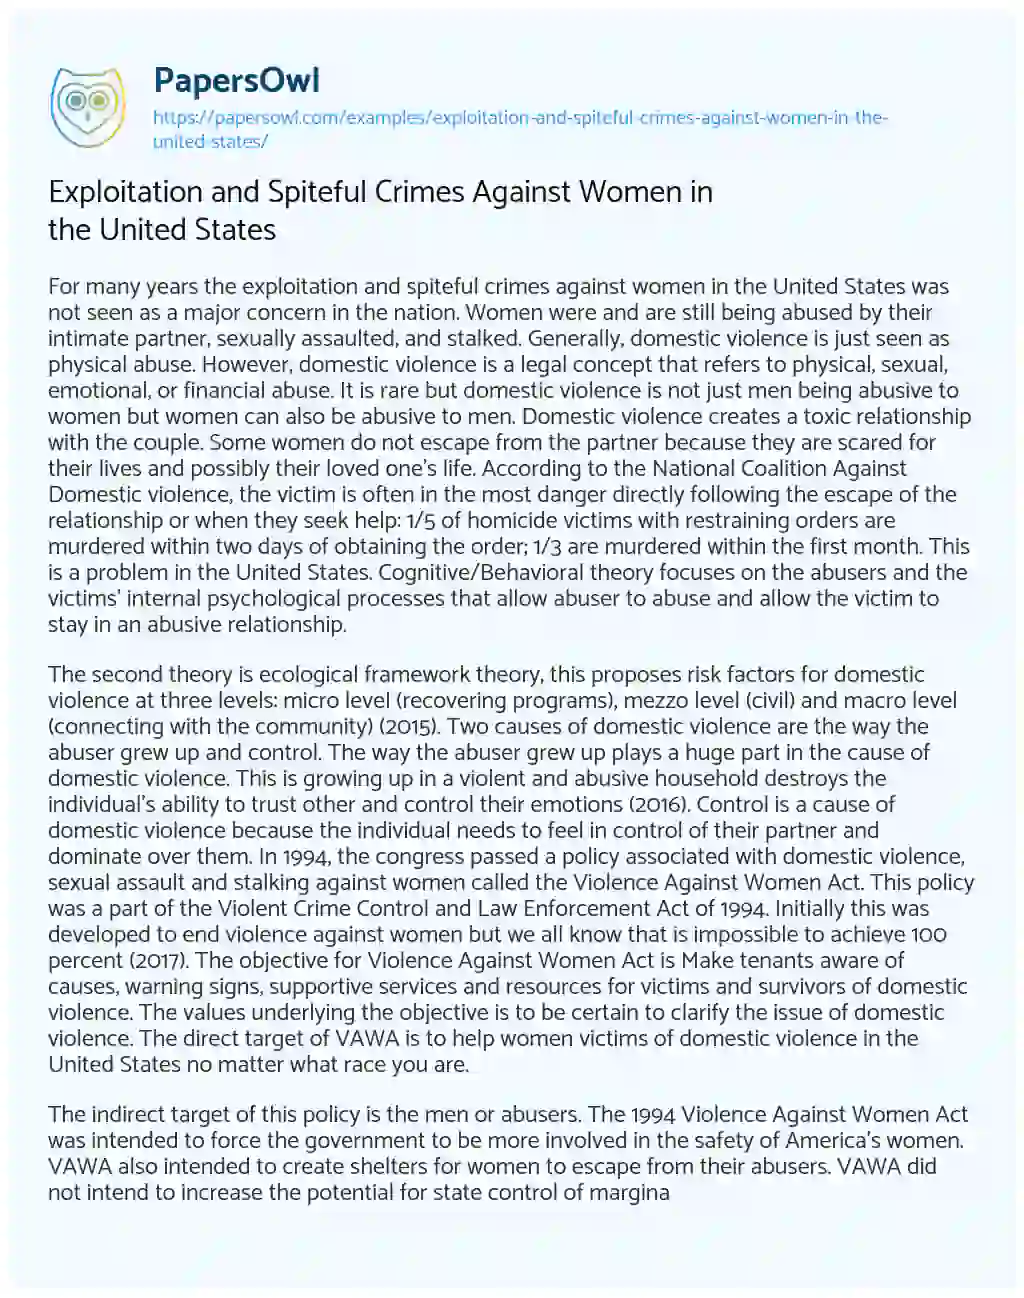 Essay on Exploitation and Spiteful Crimes against Women in the United States